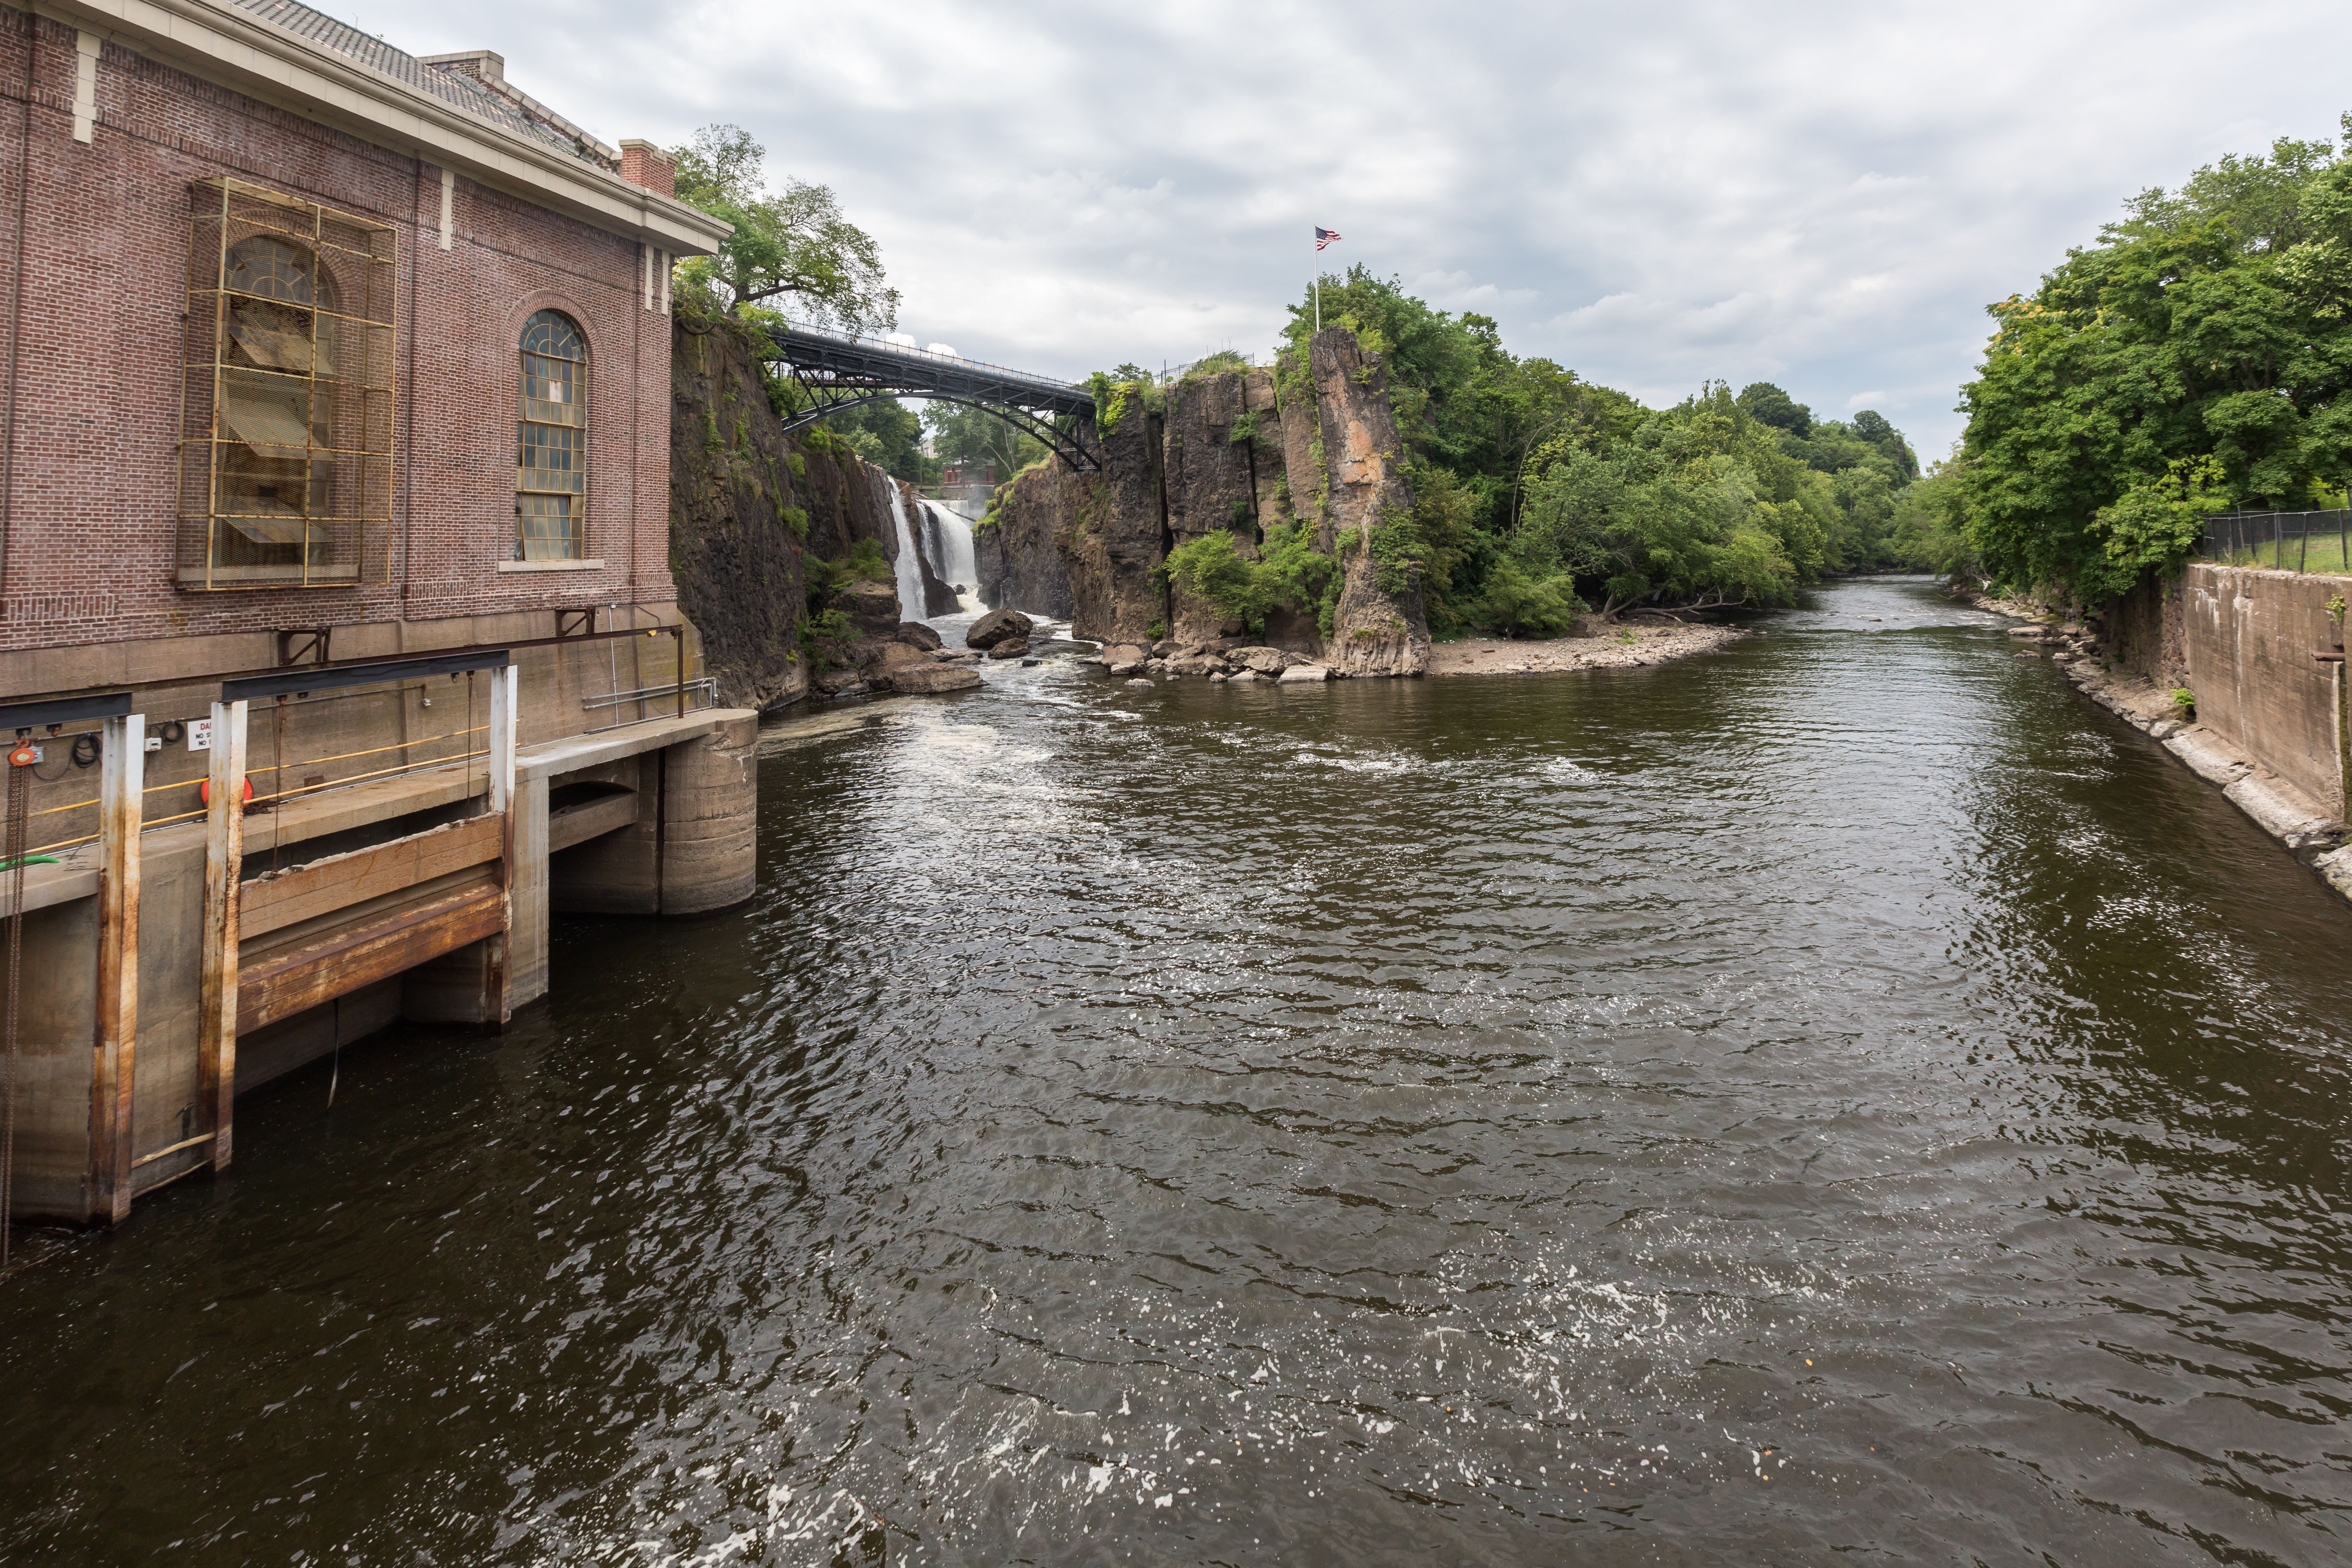 A view of Paterson falls with an aging building next to it.